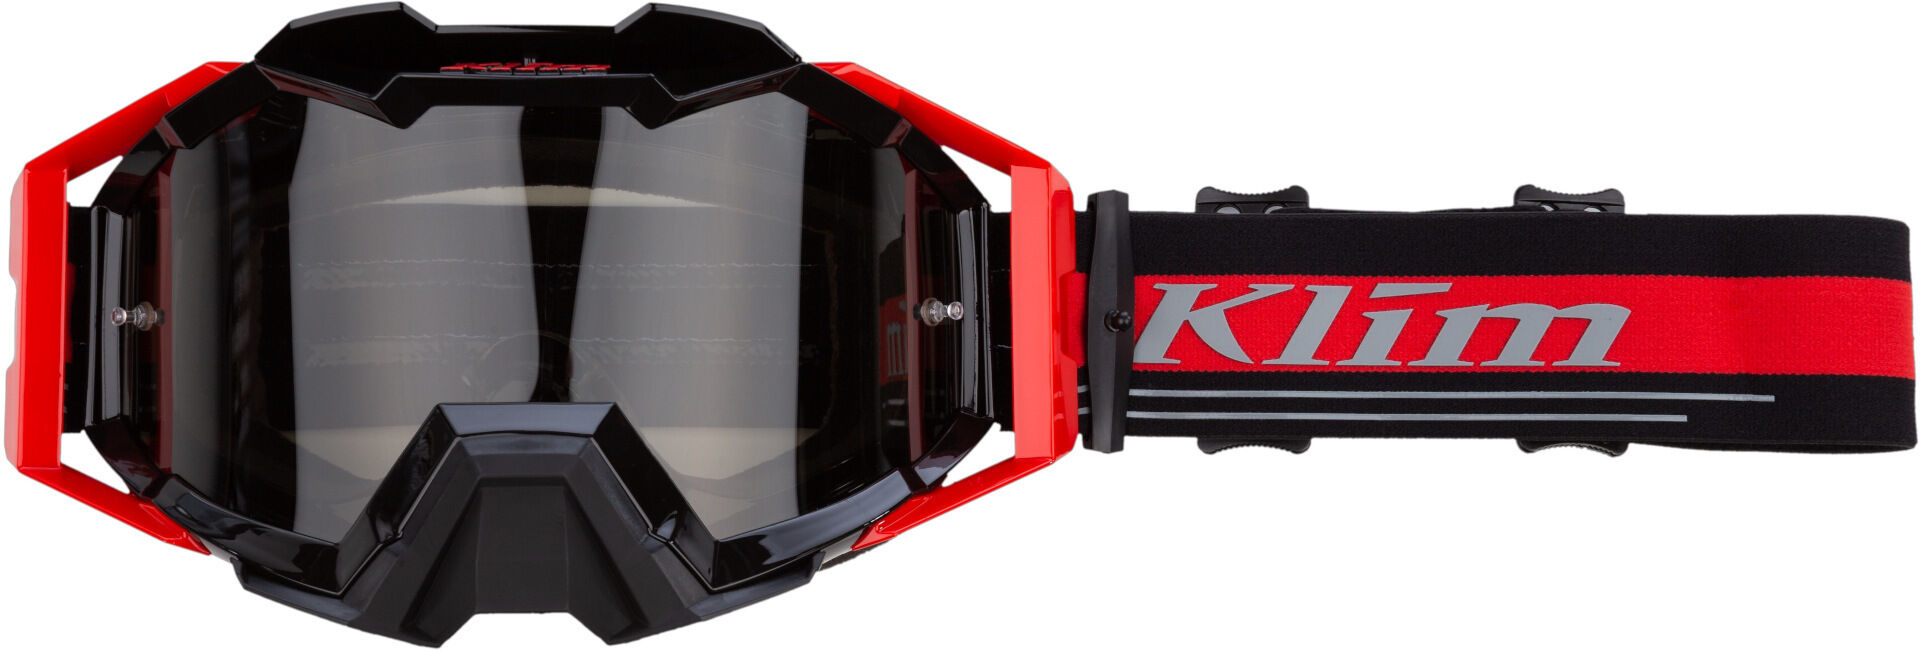 Photos - Motorcycle Goggles / Face Mask KLIM Viper Pro Ascent Motocross Goggles Unisex Black Red Size: One Size 37 